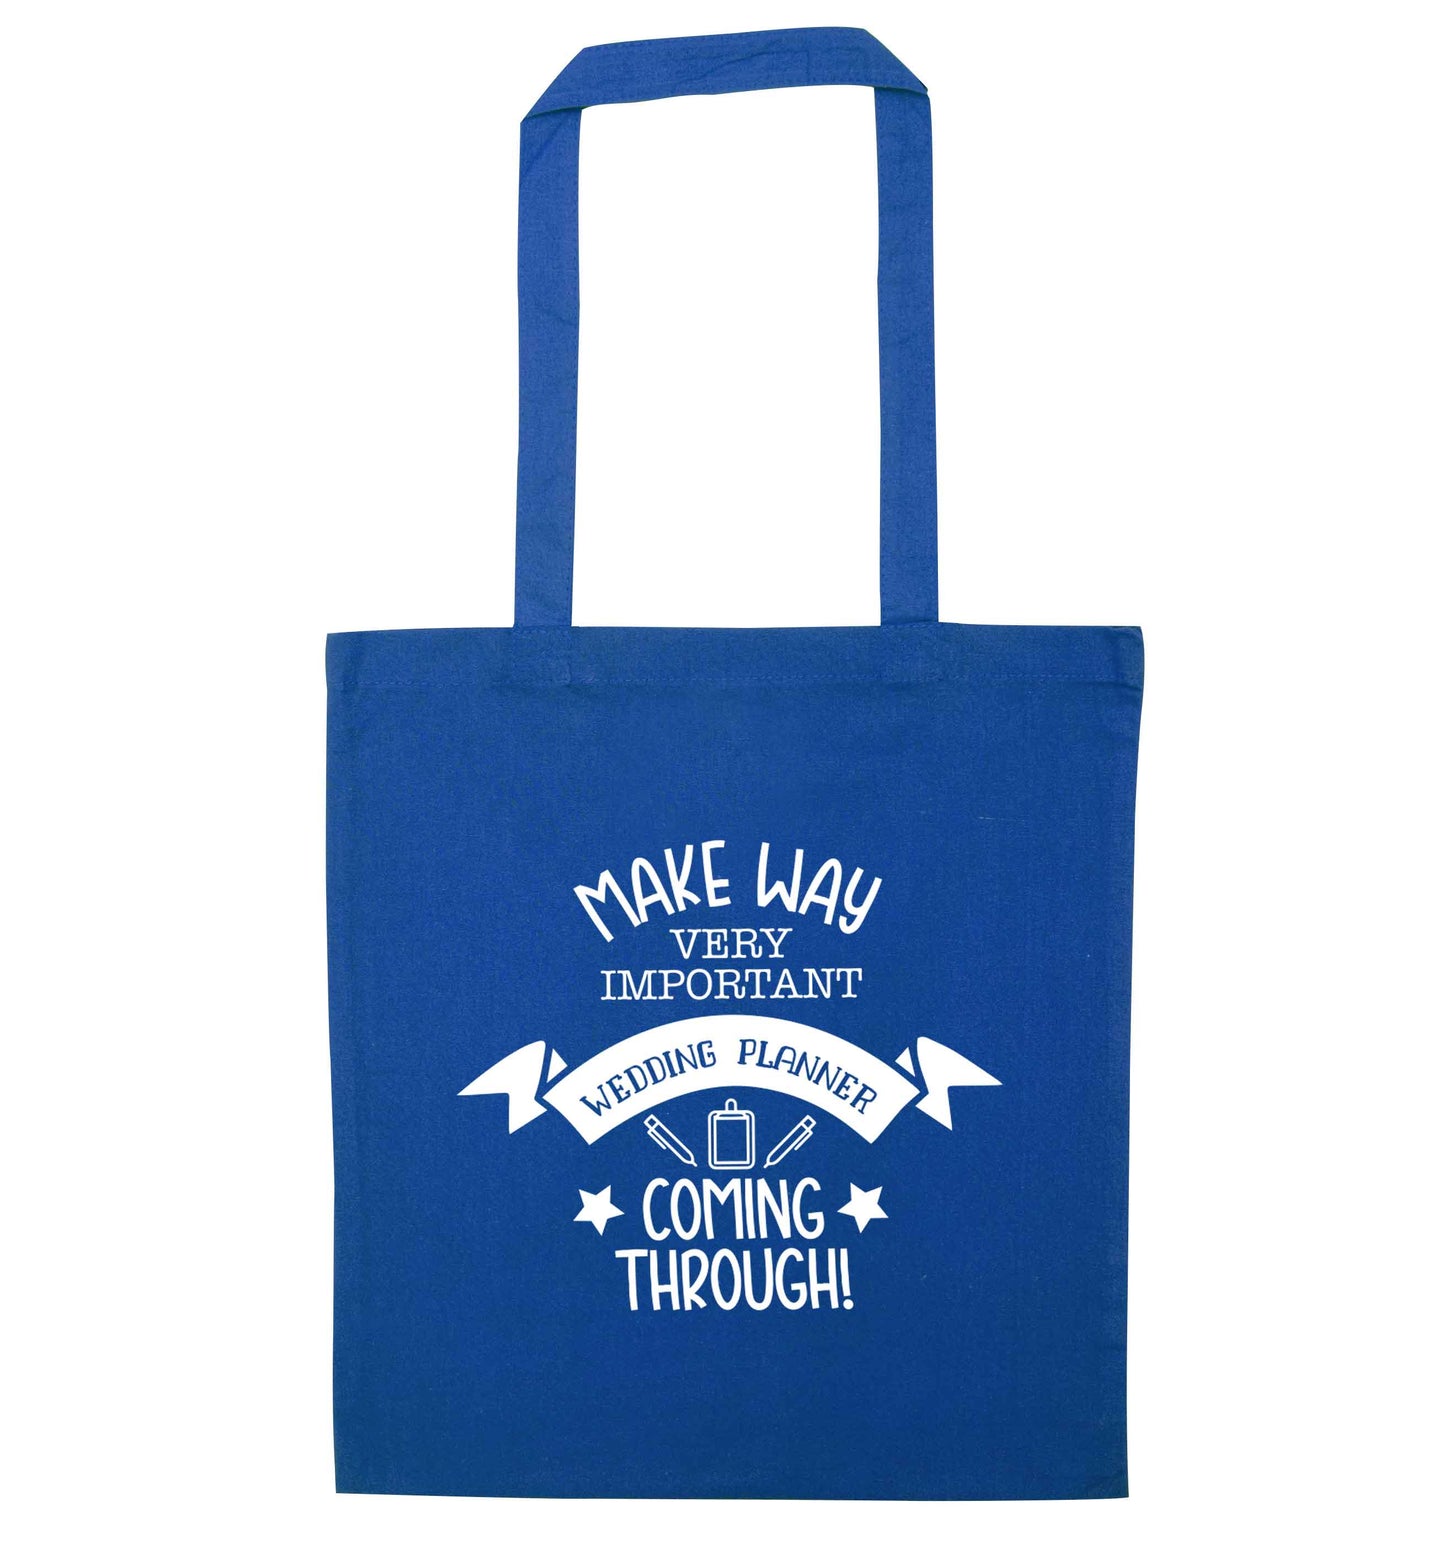 Make way very important wedding planner coming through blue tote bag